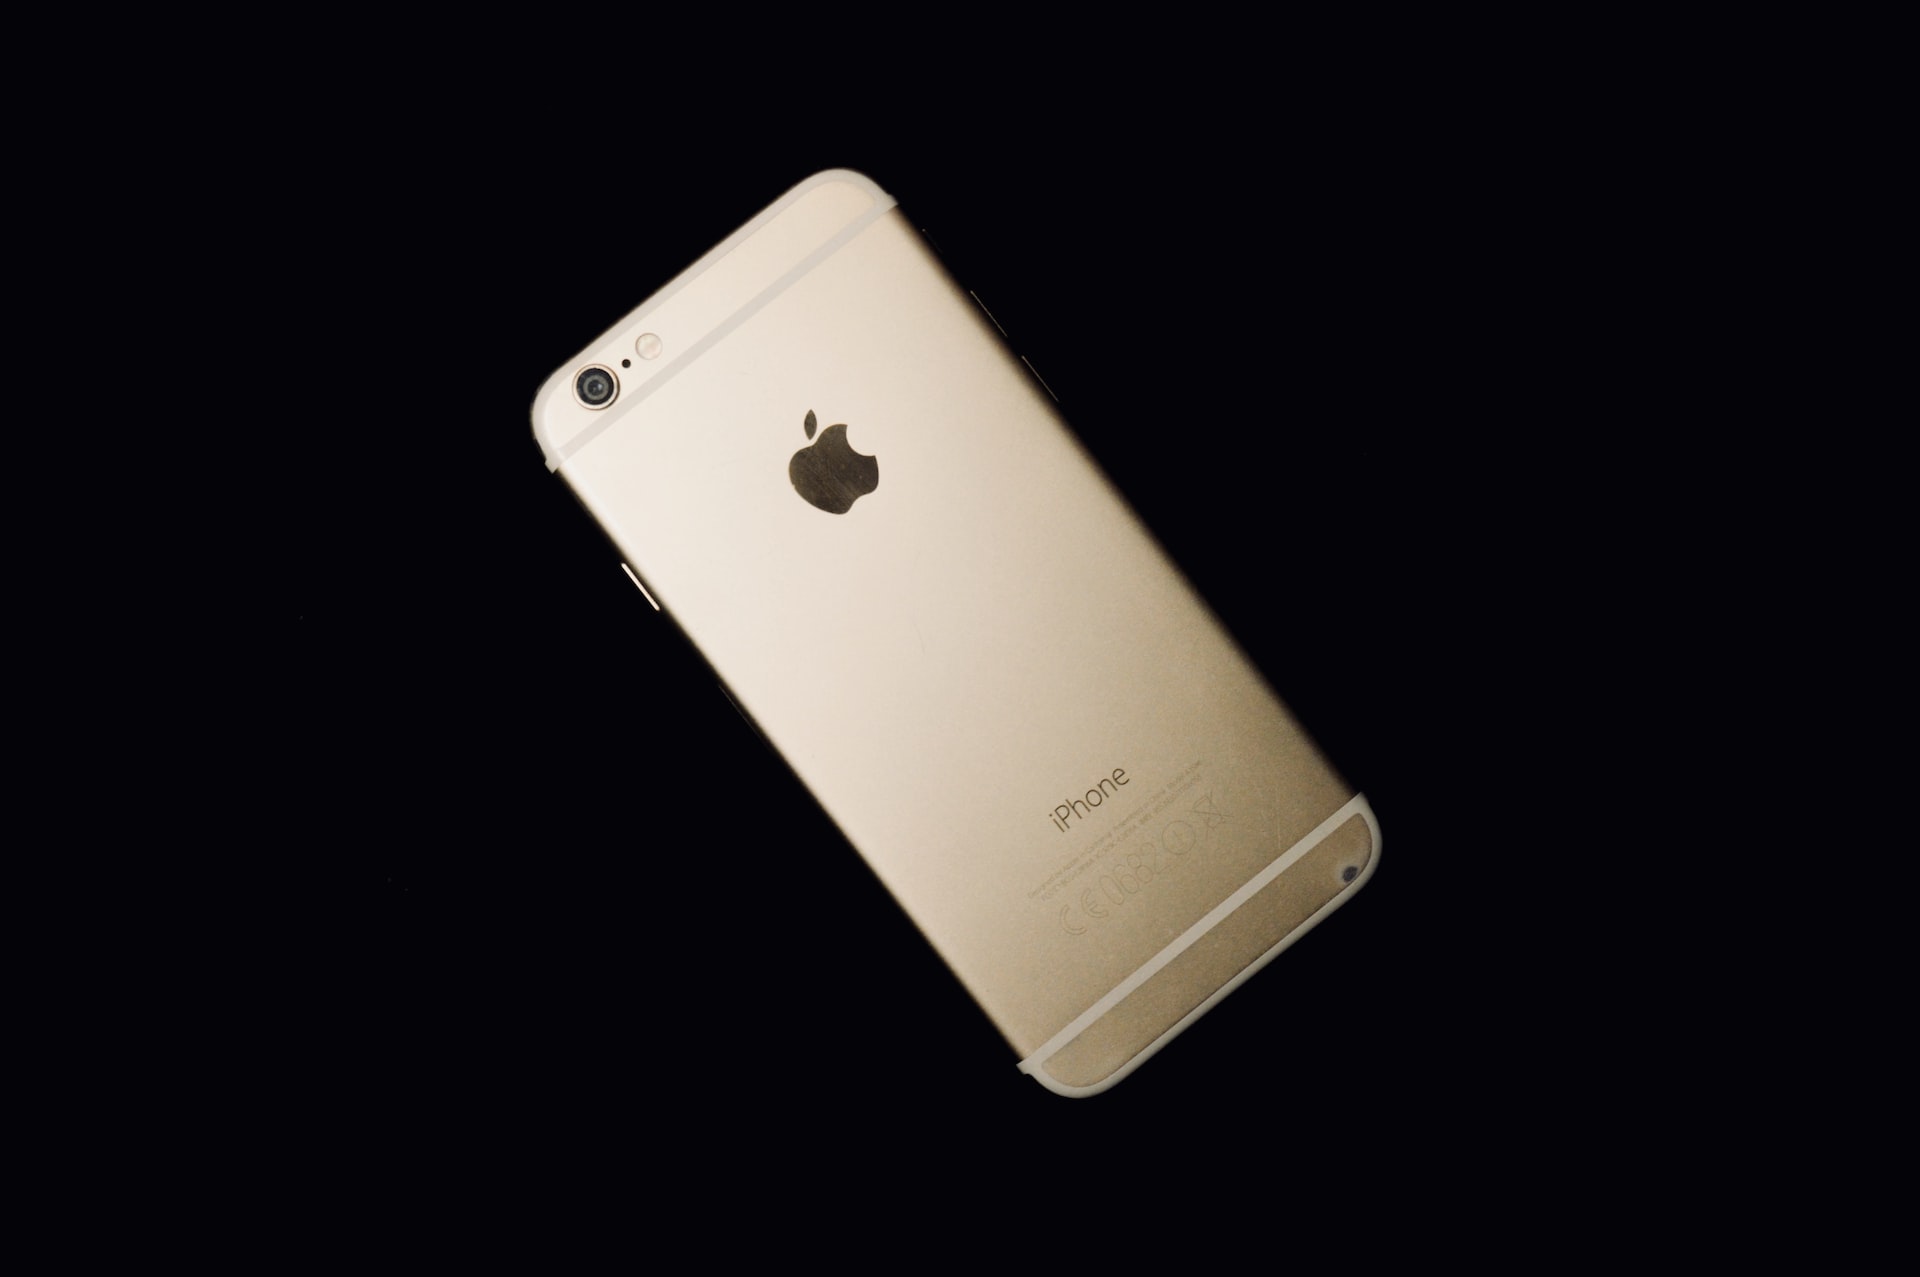 iPhone 6 gold